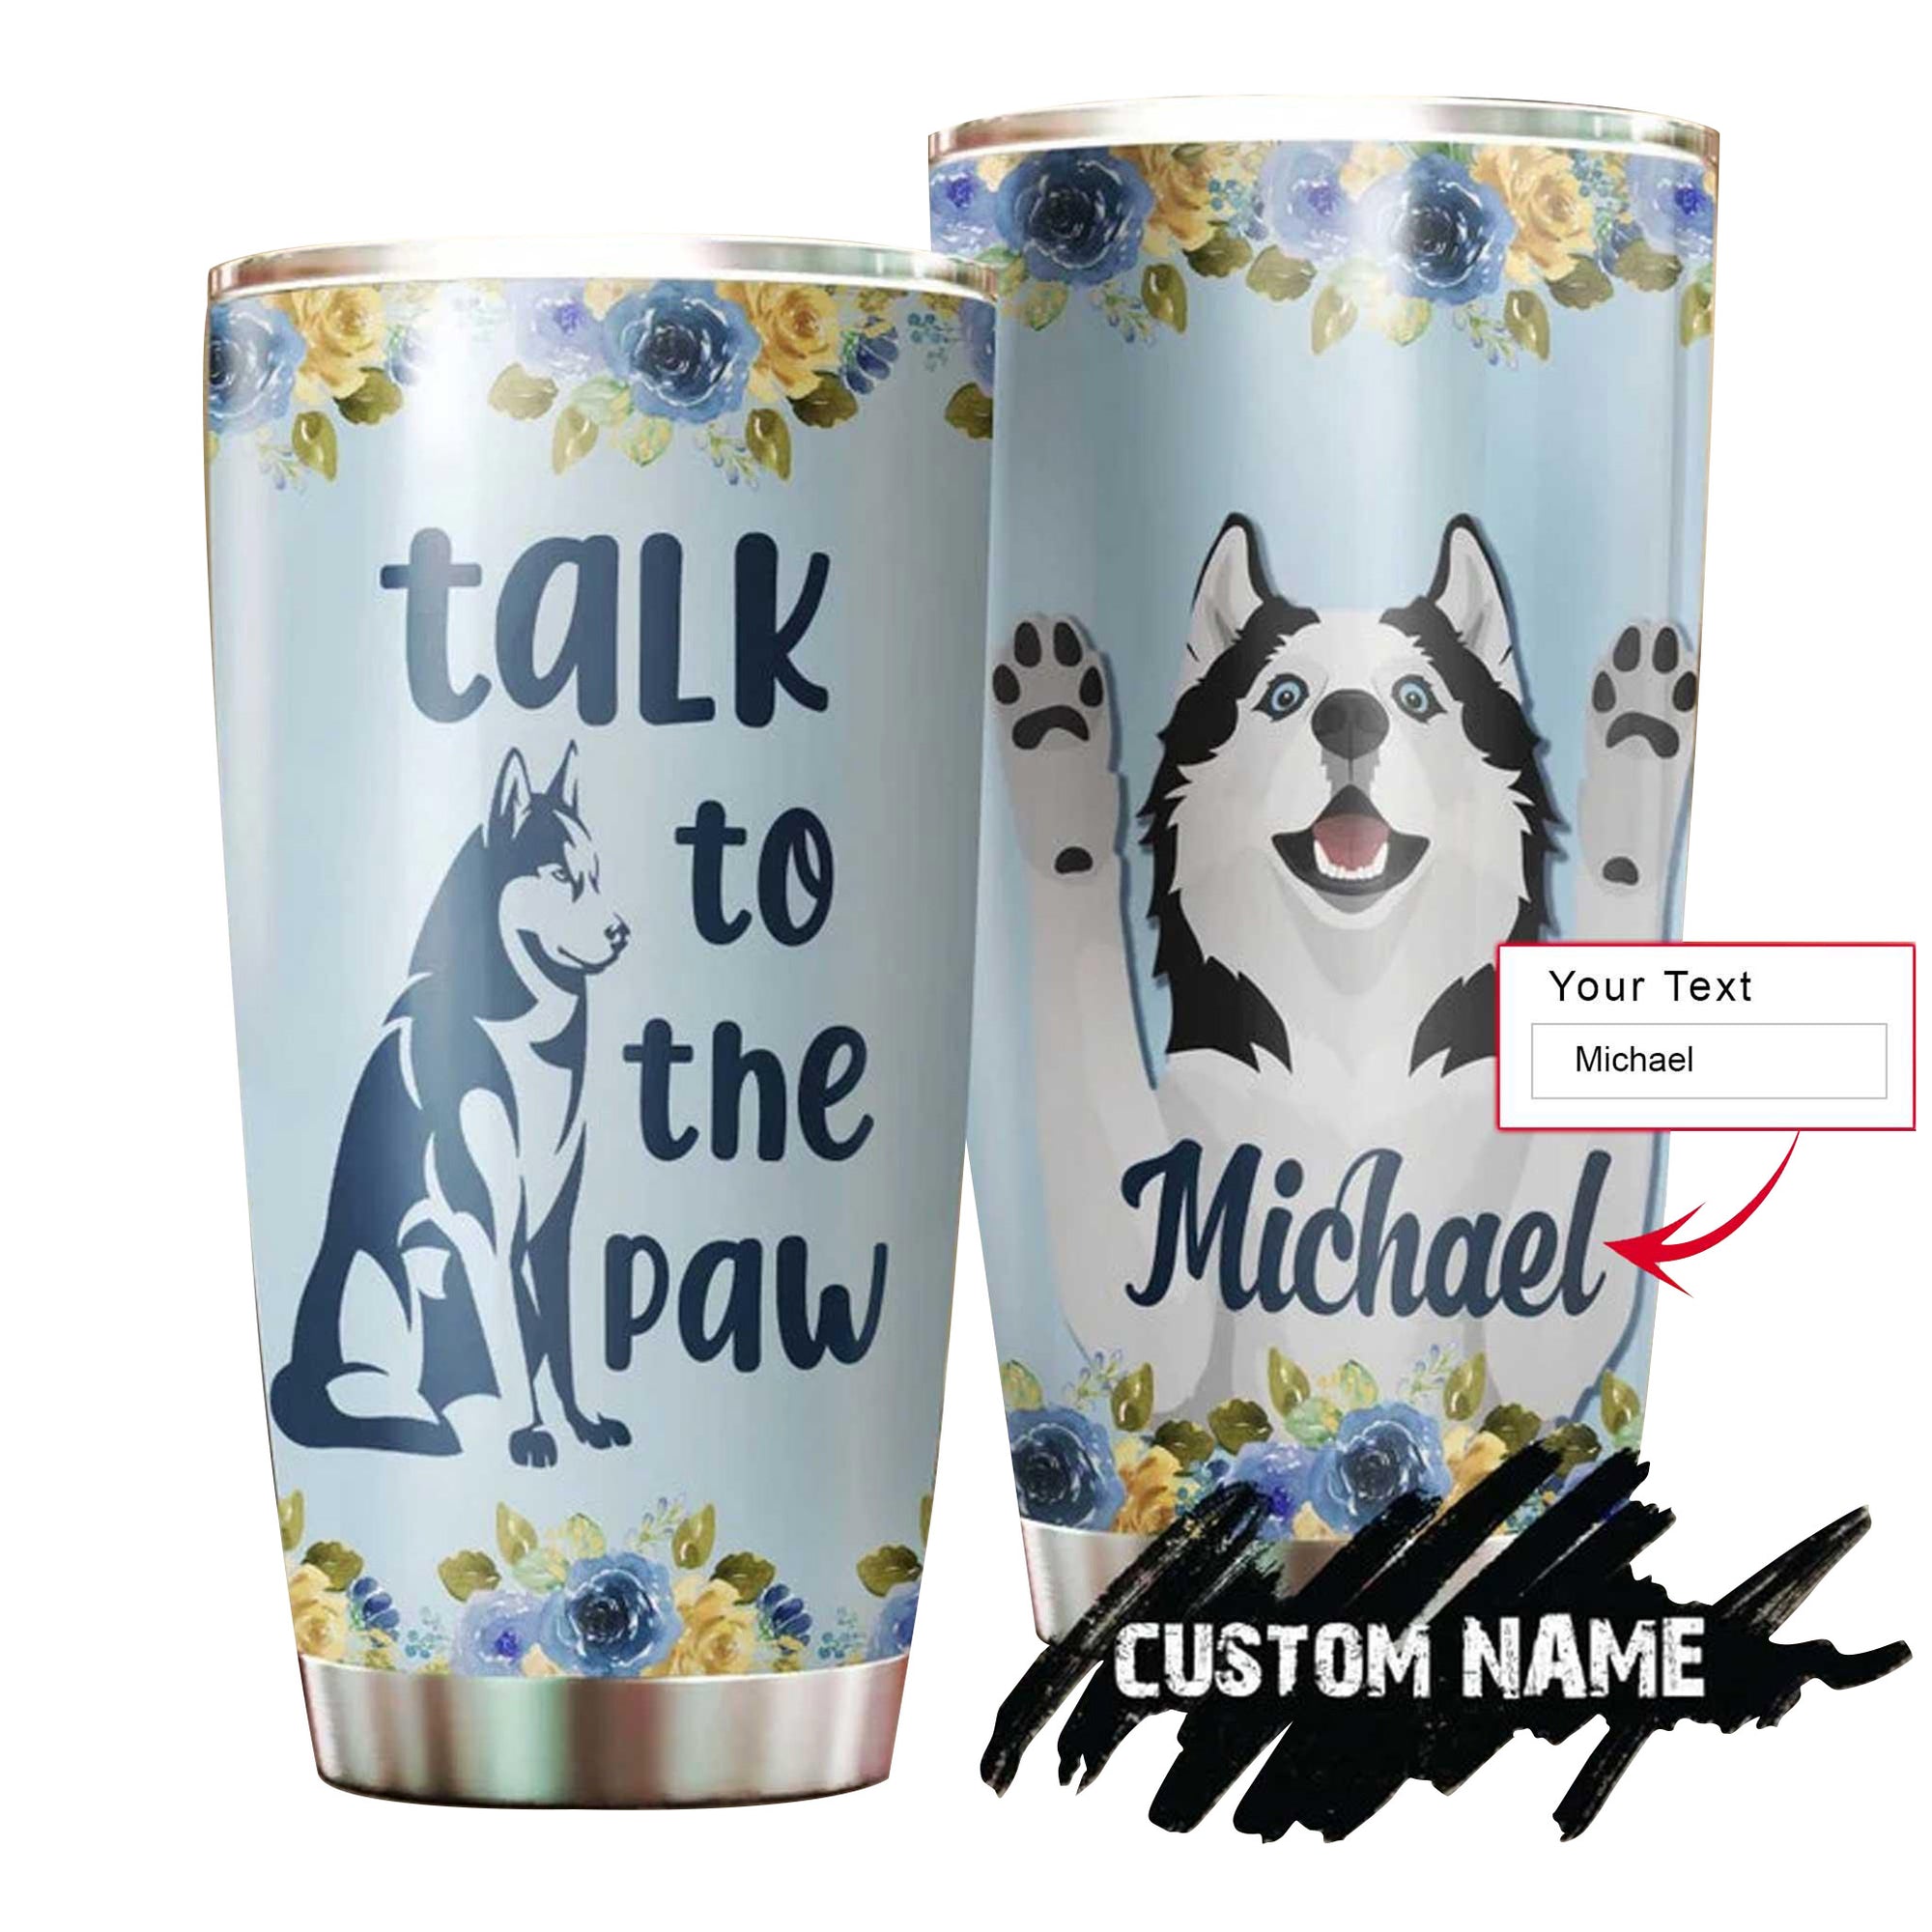 Husky Personalized Tumbler - Talk To The Paw Tumbler - Perfect Gift For Husky Lover, Friend, Family